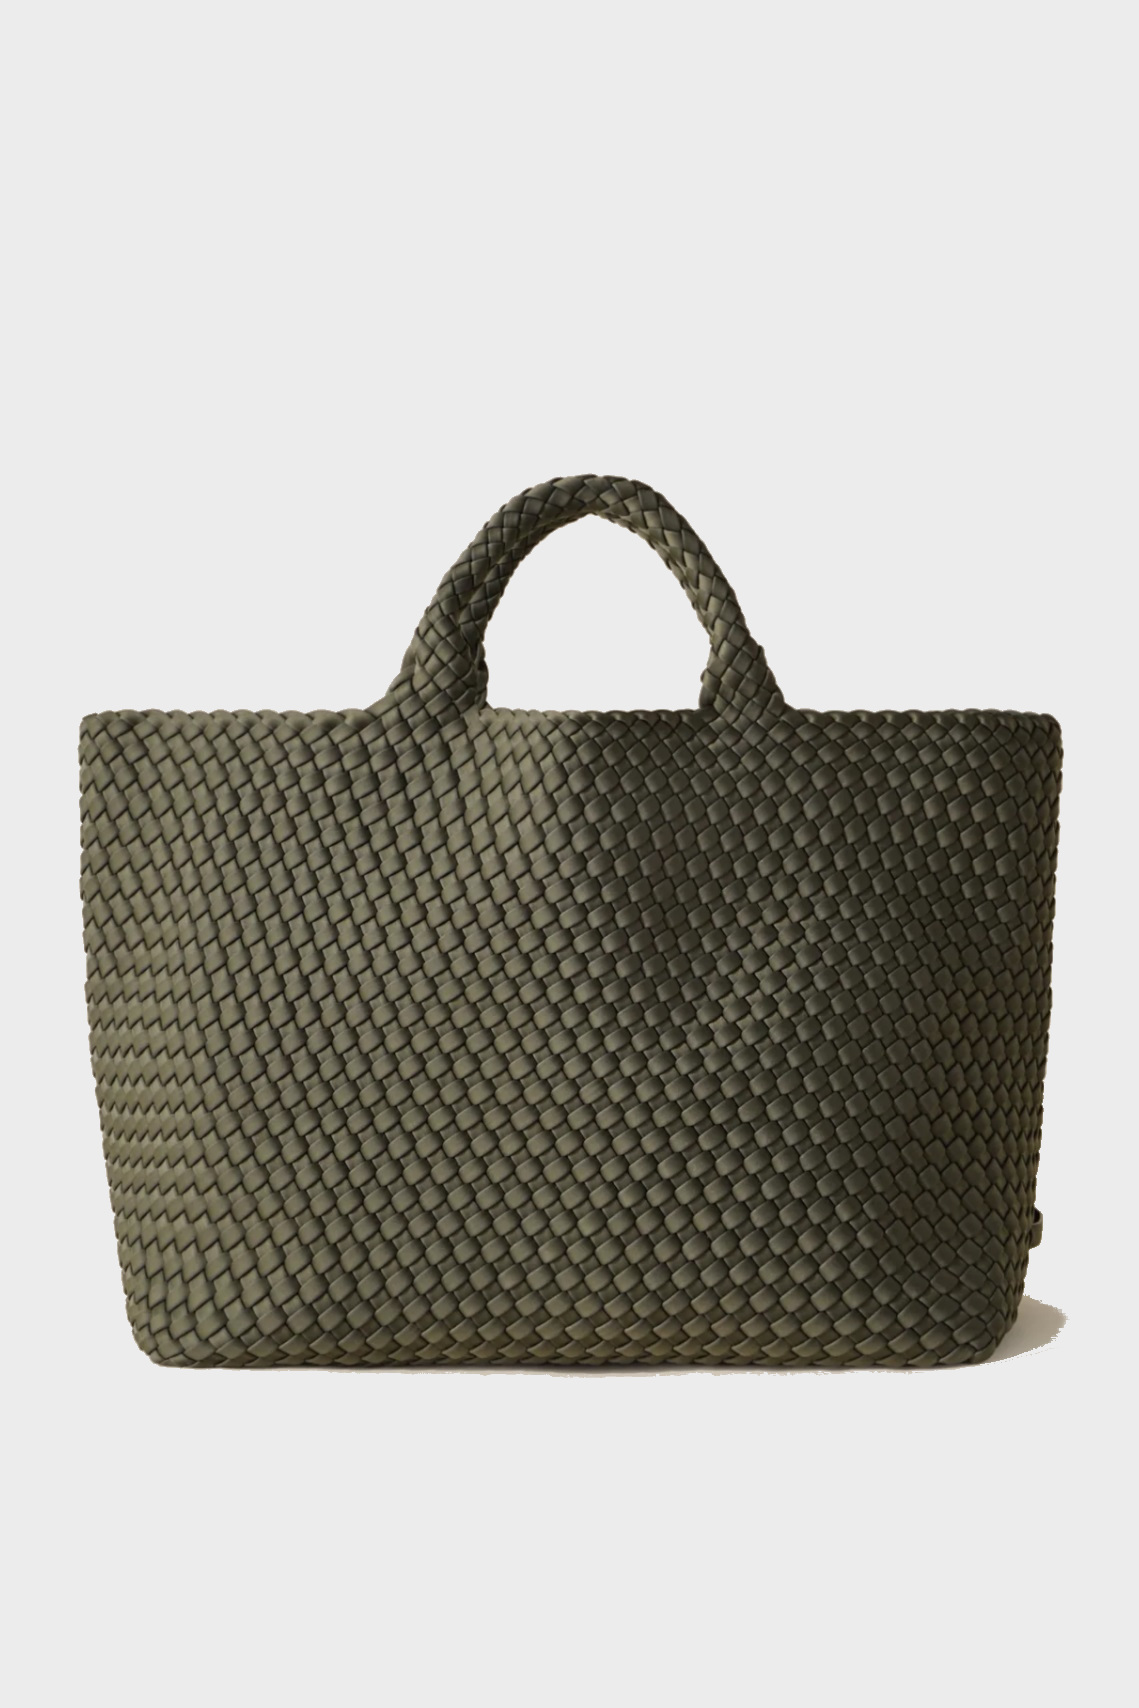 NAGHEDI Handwoven Large Tote St. Barth in Olive